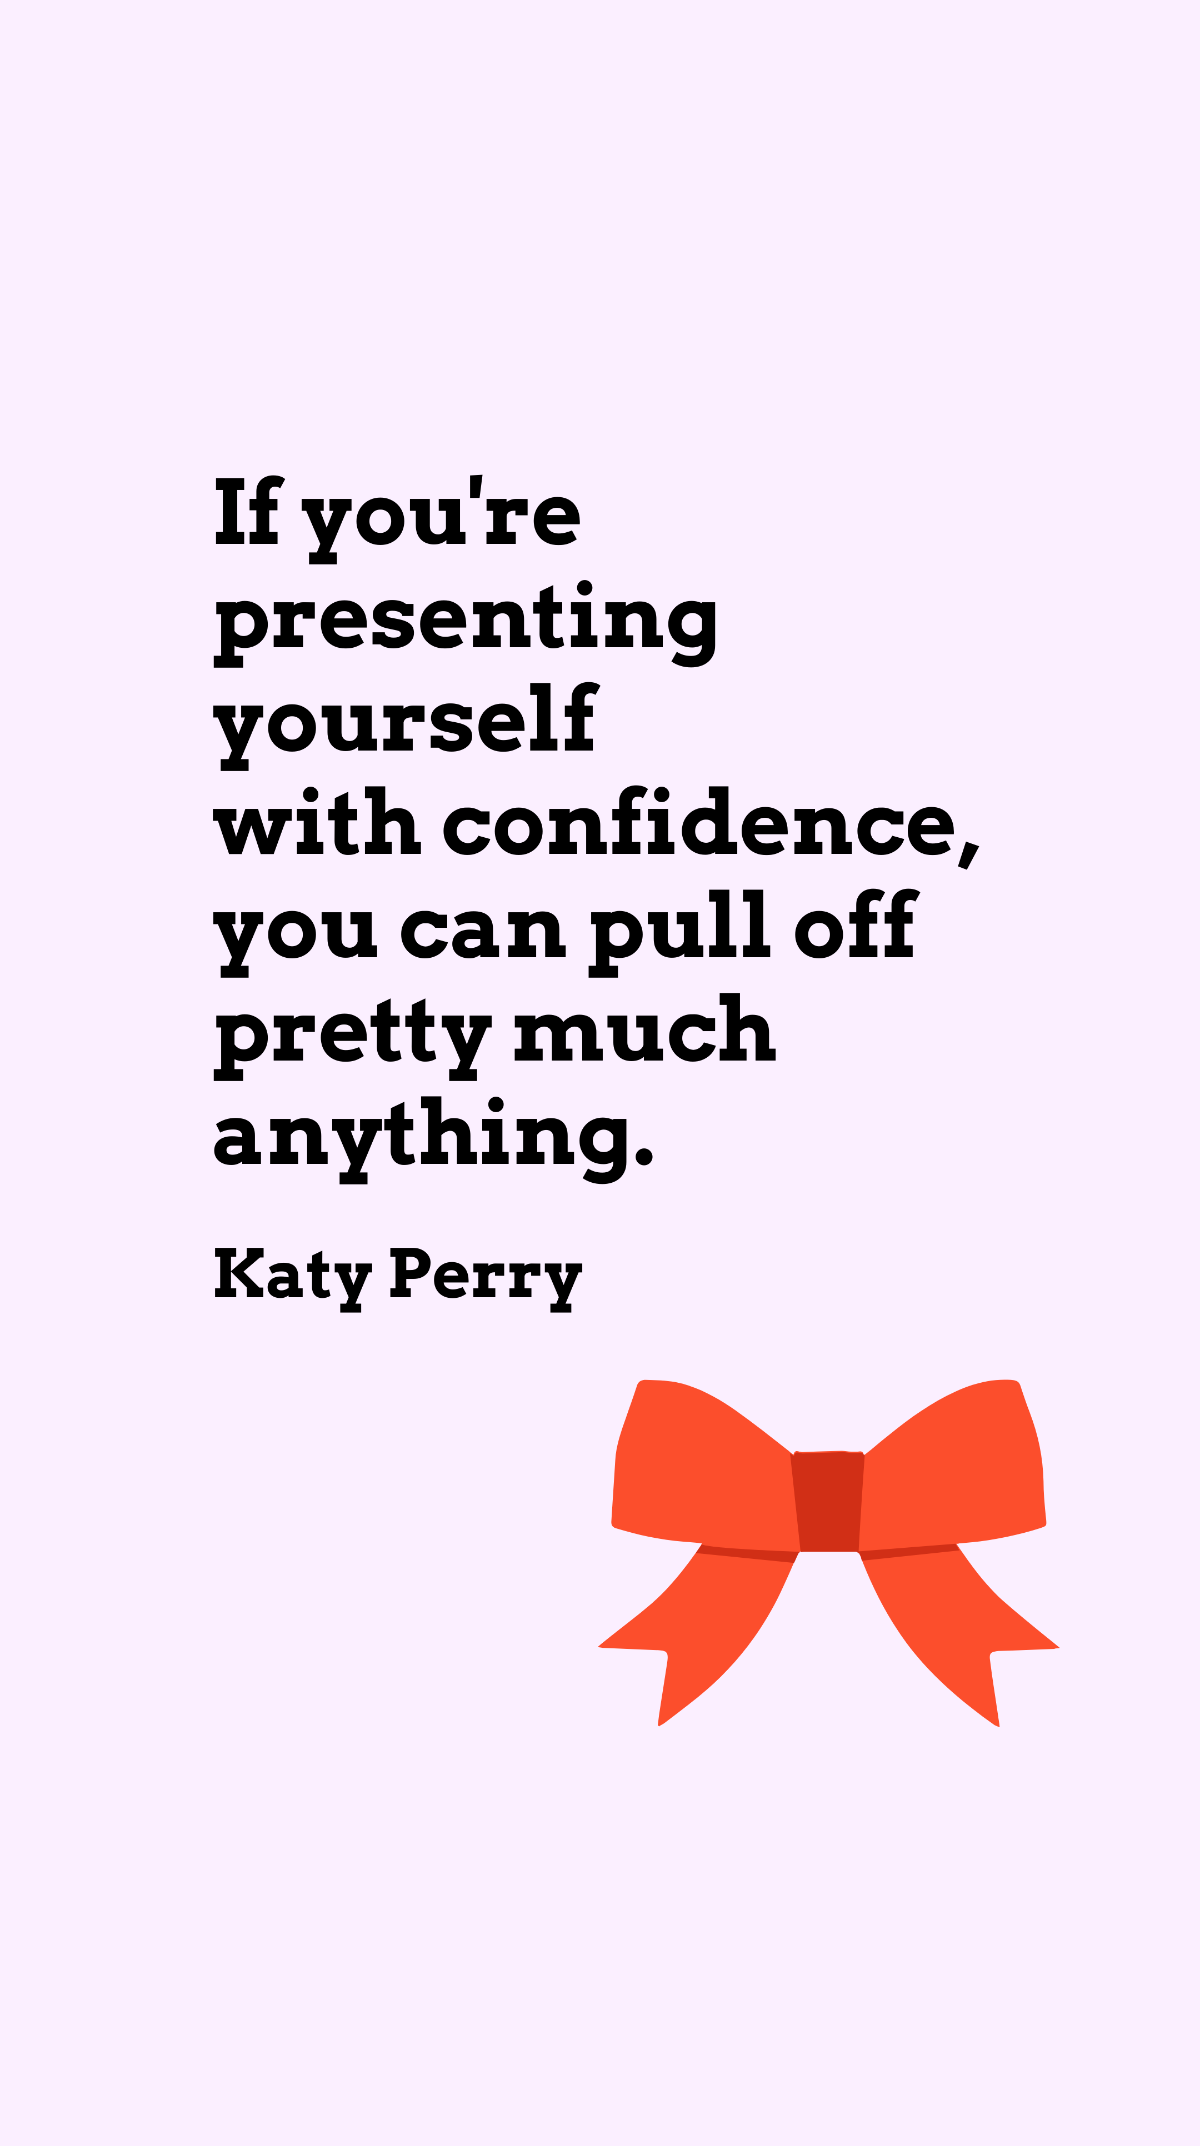 Katy Perry - If you're presenting yourself with confidence, you can pull off pretty much anything. Template